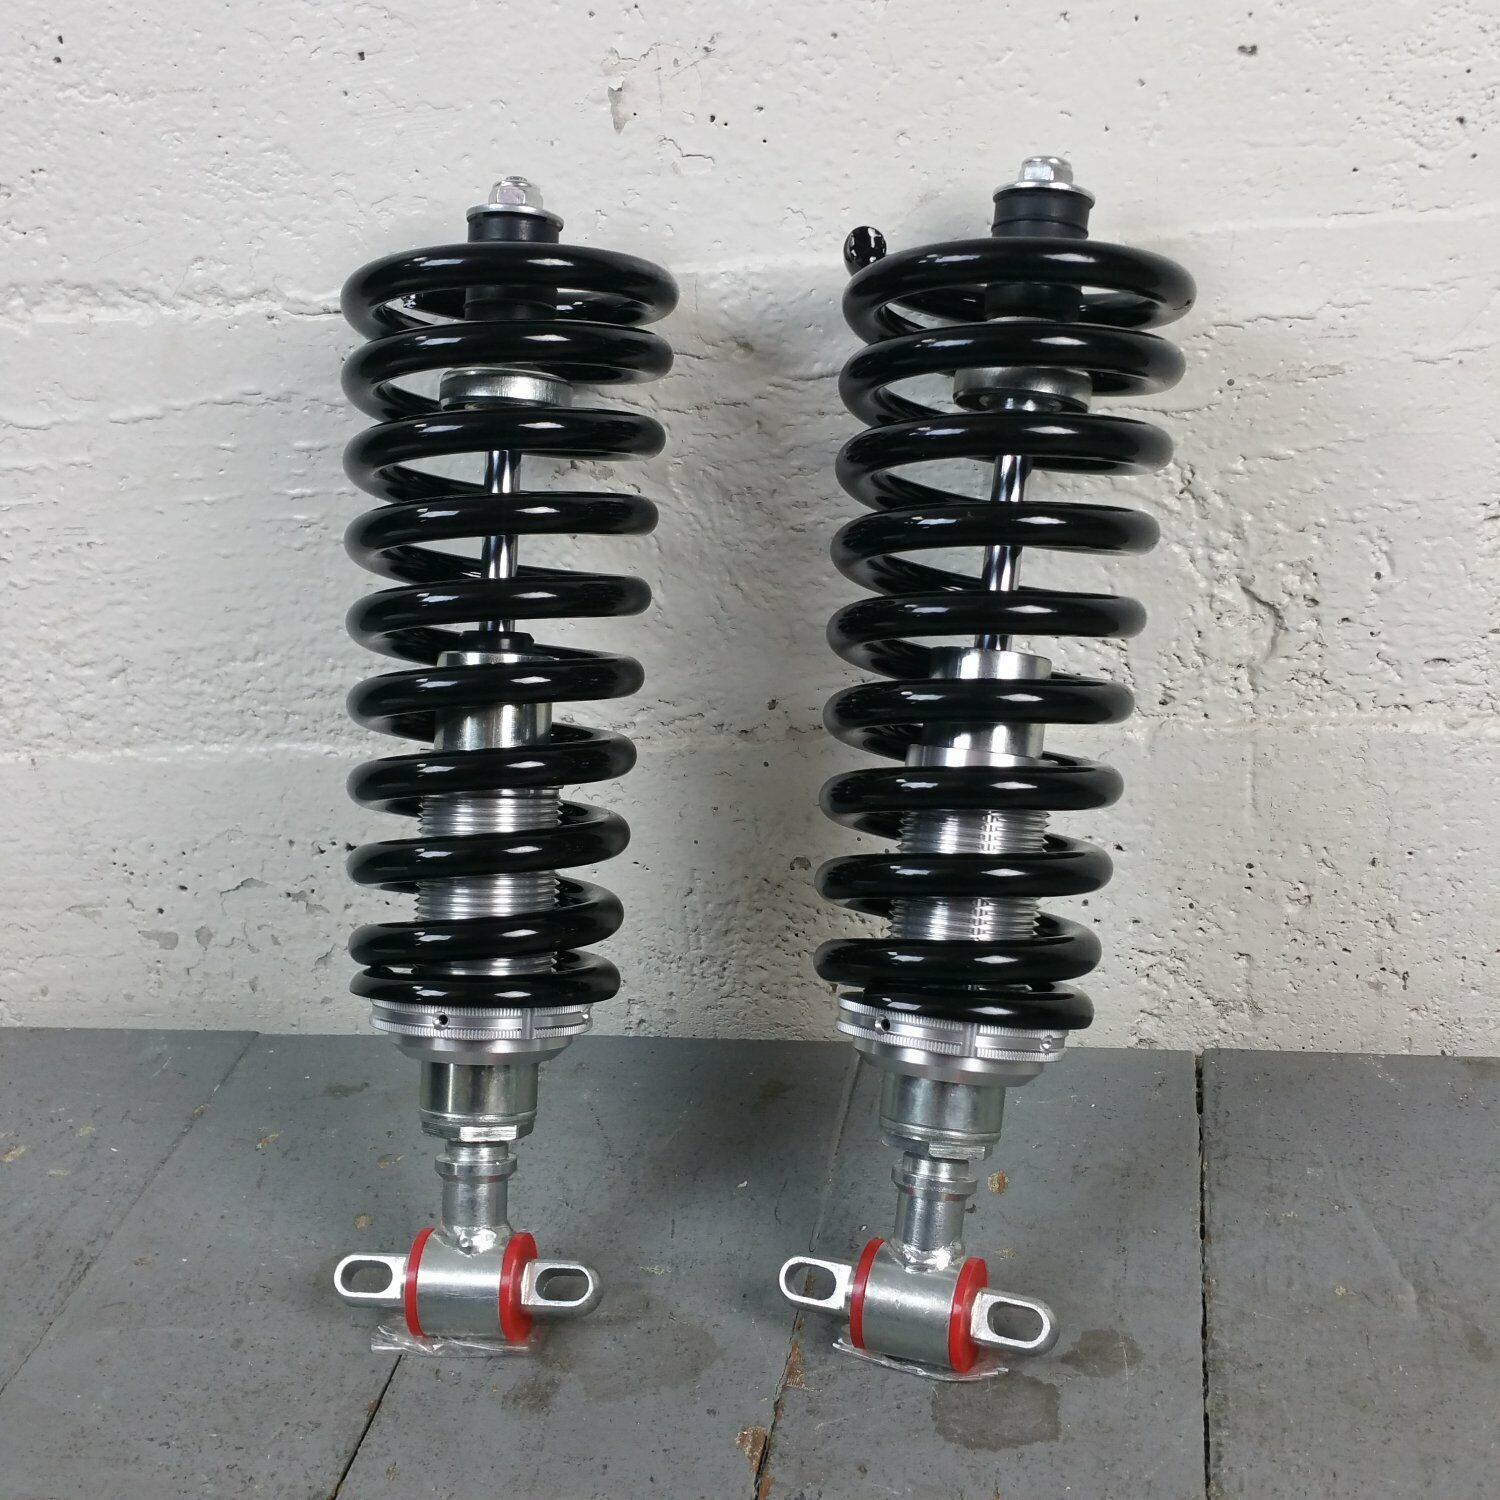 1958-70 Chevy Impala Bel Air SBC 500lb Front Coilover Shocks Fits Tubular A-Arms